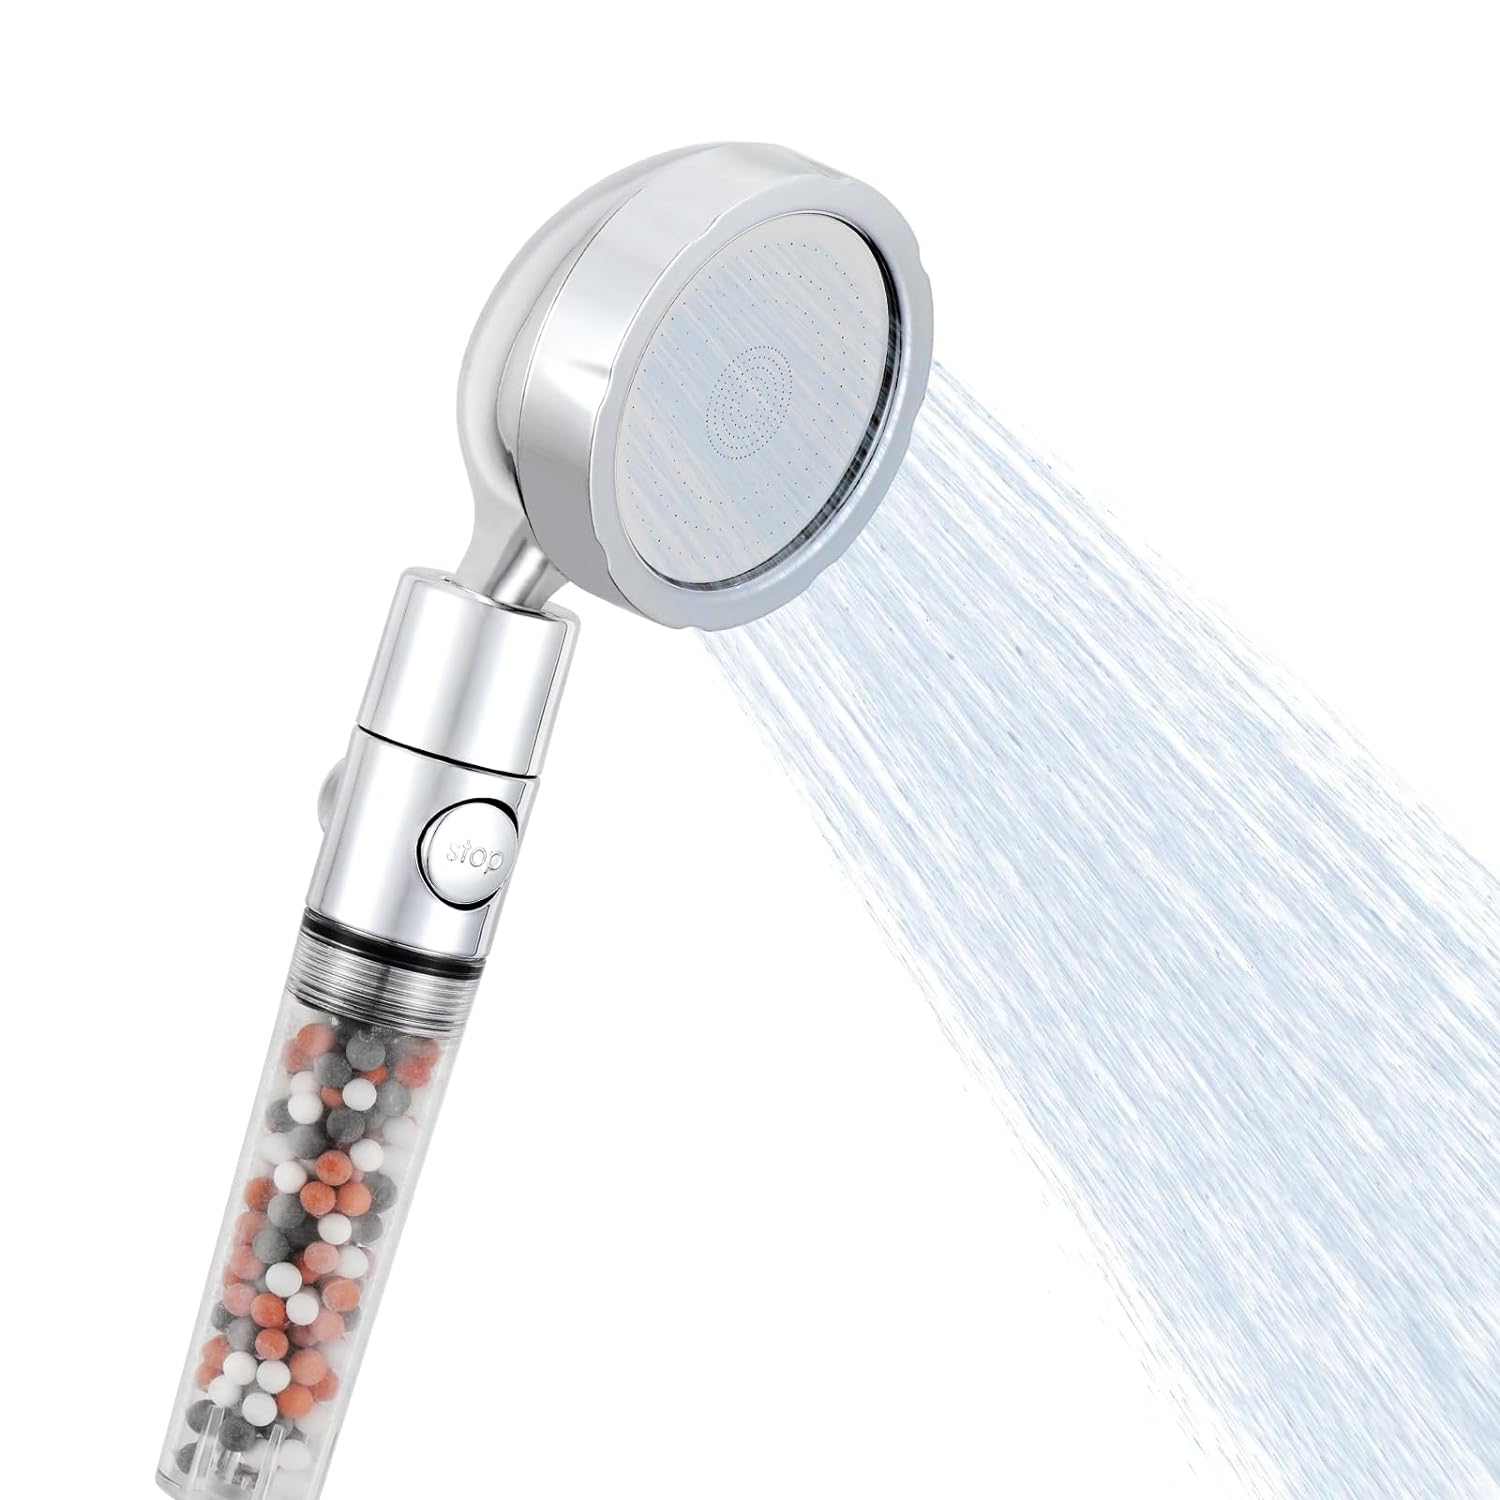 High Pressure Shower Heads, Rainfall Show Head with Handheld, 3 Function (Chrome plate)